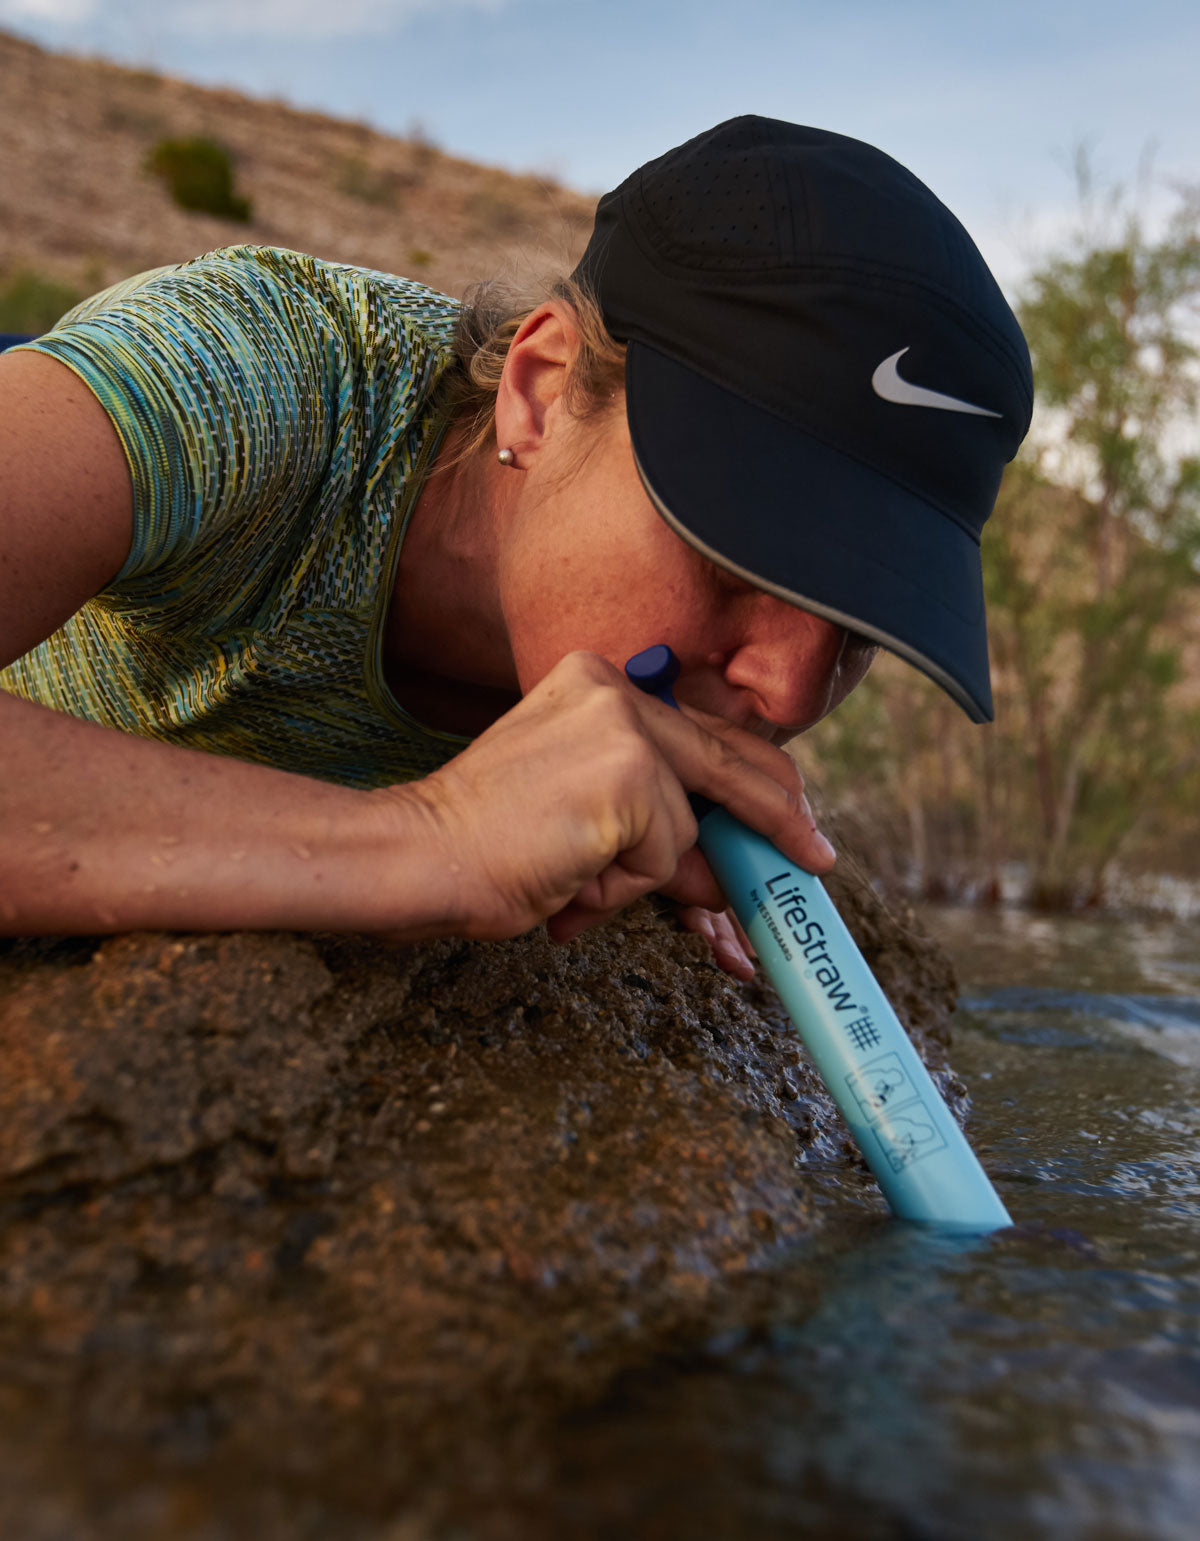 3 Ways to Drink Clean Water with the New Peak Series LifeStraw #LifeStraw  #cleanwater @Lifestraw « Adafruit Industries – Makers, hackers, artists,  designers and engineers!